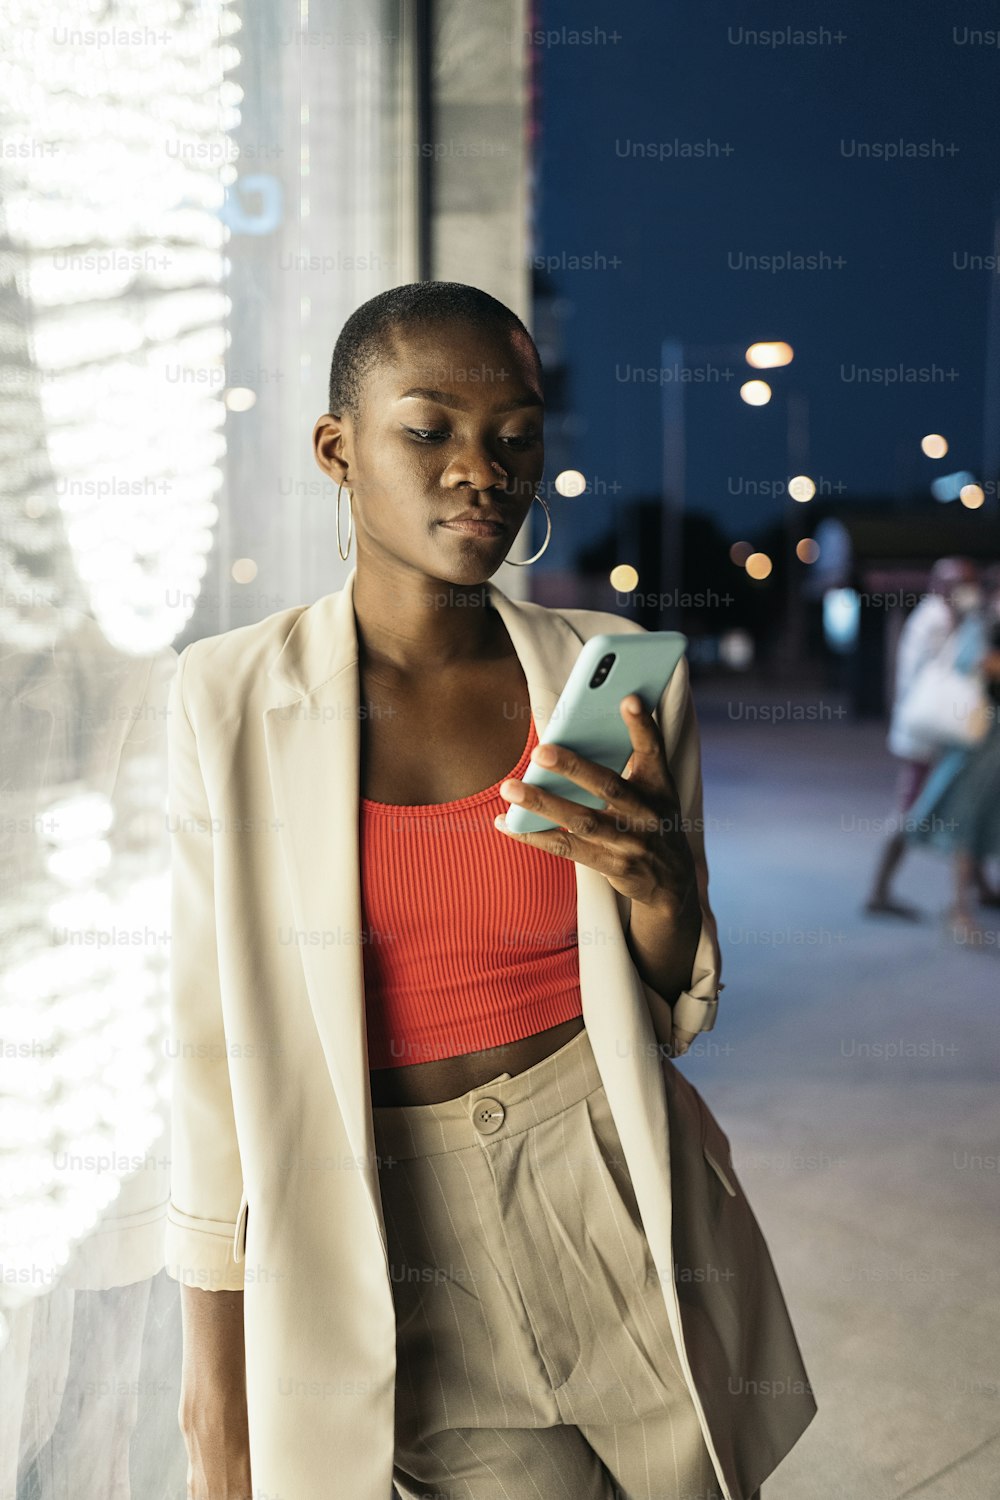 Portrait of a fashionable young woman with short hair and leaning her body against a shop window at night while using her phone